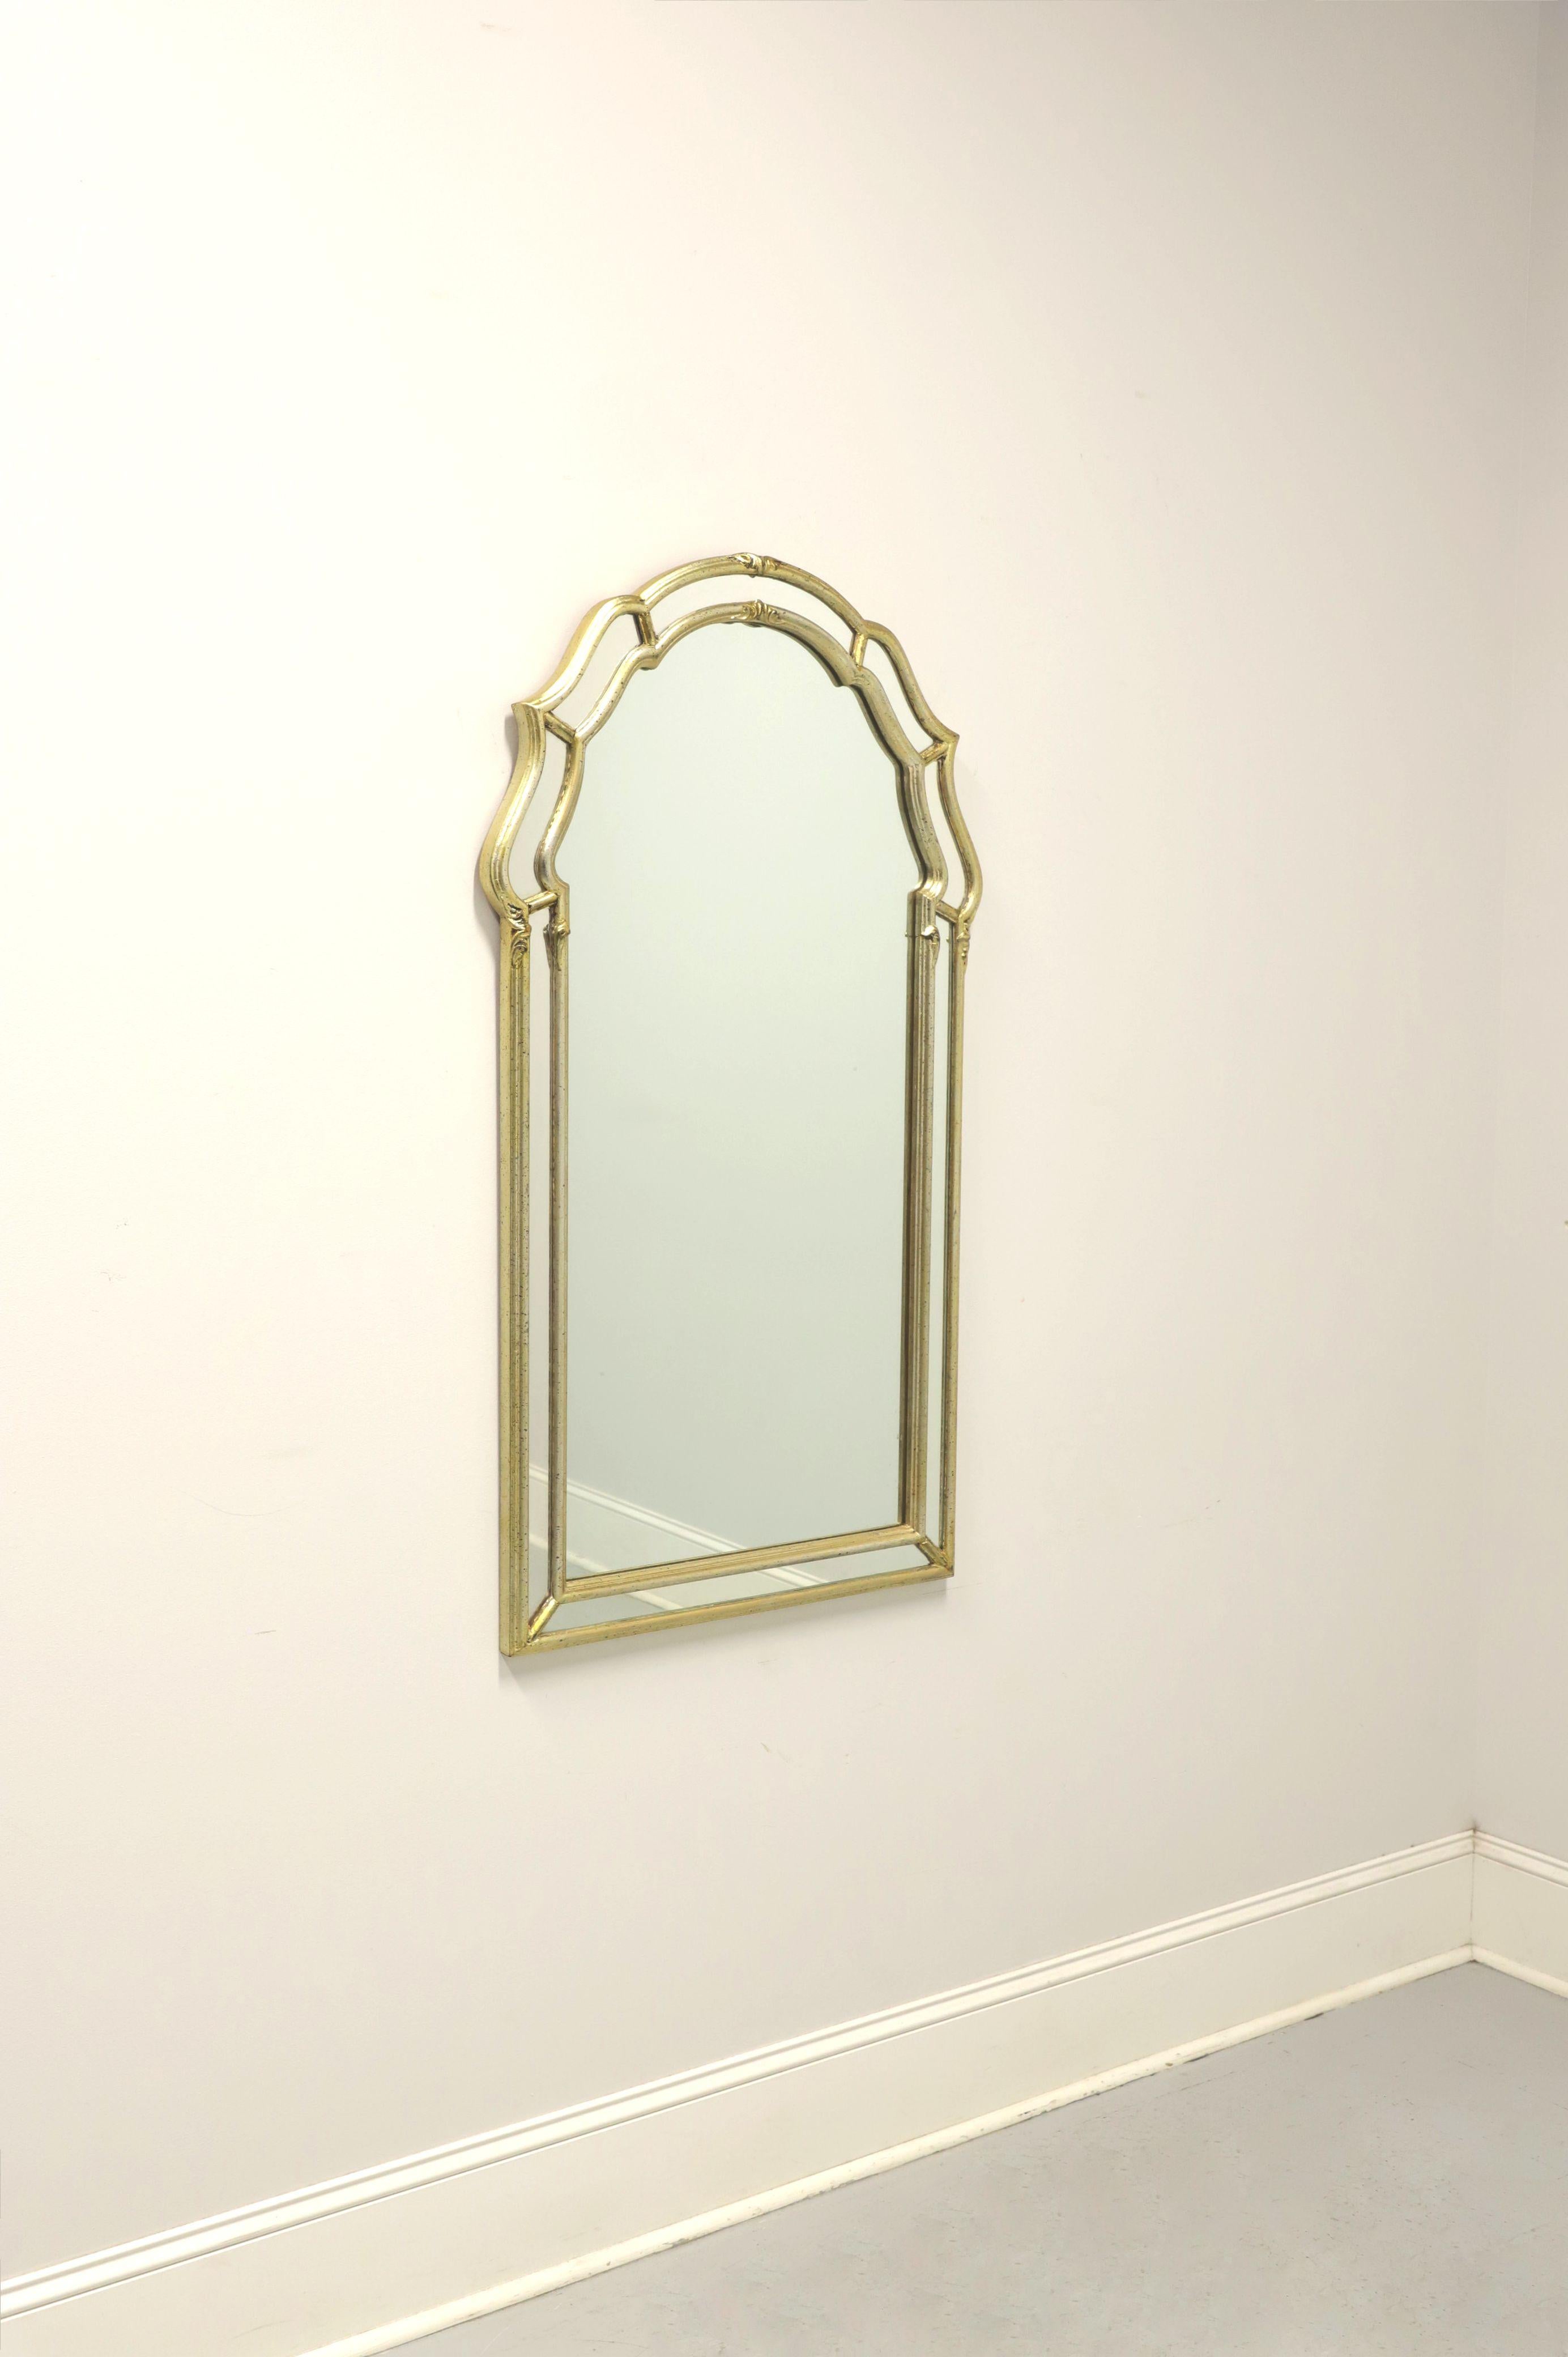 A Regency style parclose wall mirror by Labarge. Mirrored glass in a solid wood frame painted gold. Features arched top with strips of mirrors surrounding on outer edges. Made in Italy, in the mid 20th Century. 

Measures: 26w 1.5d 46.25h, Weighs